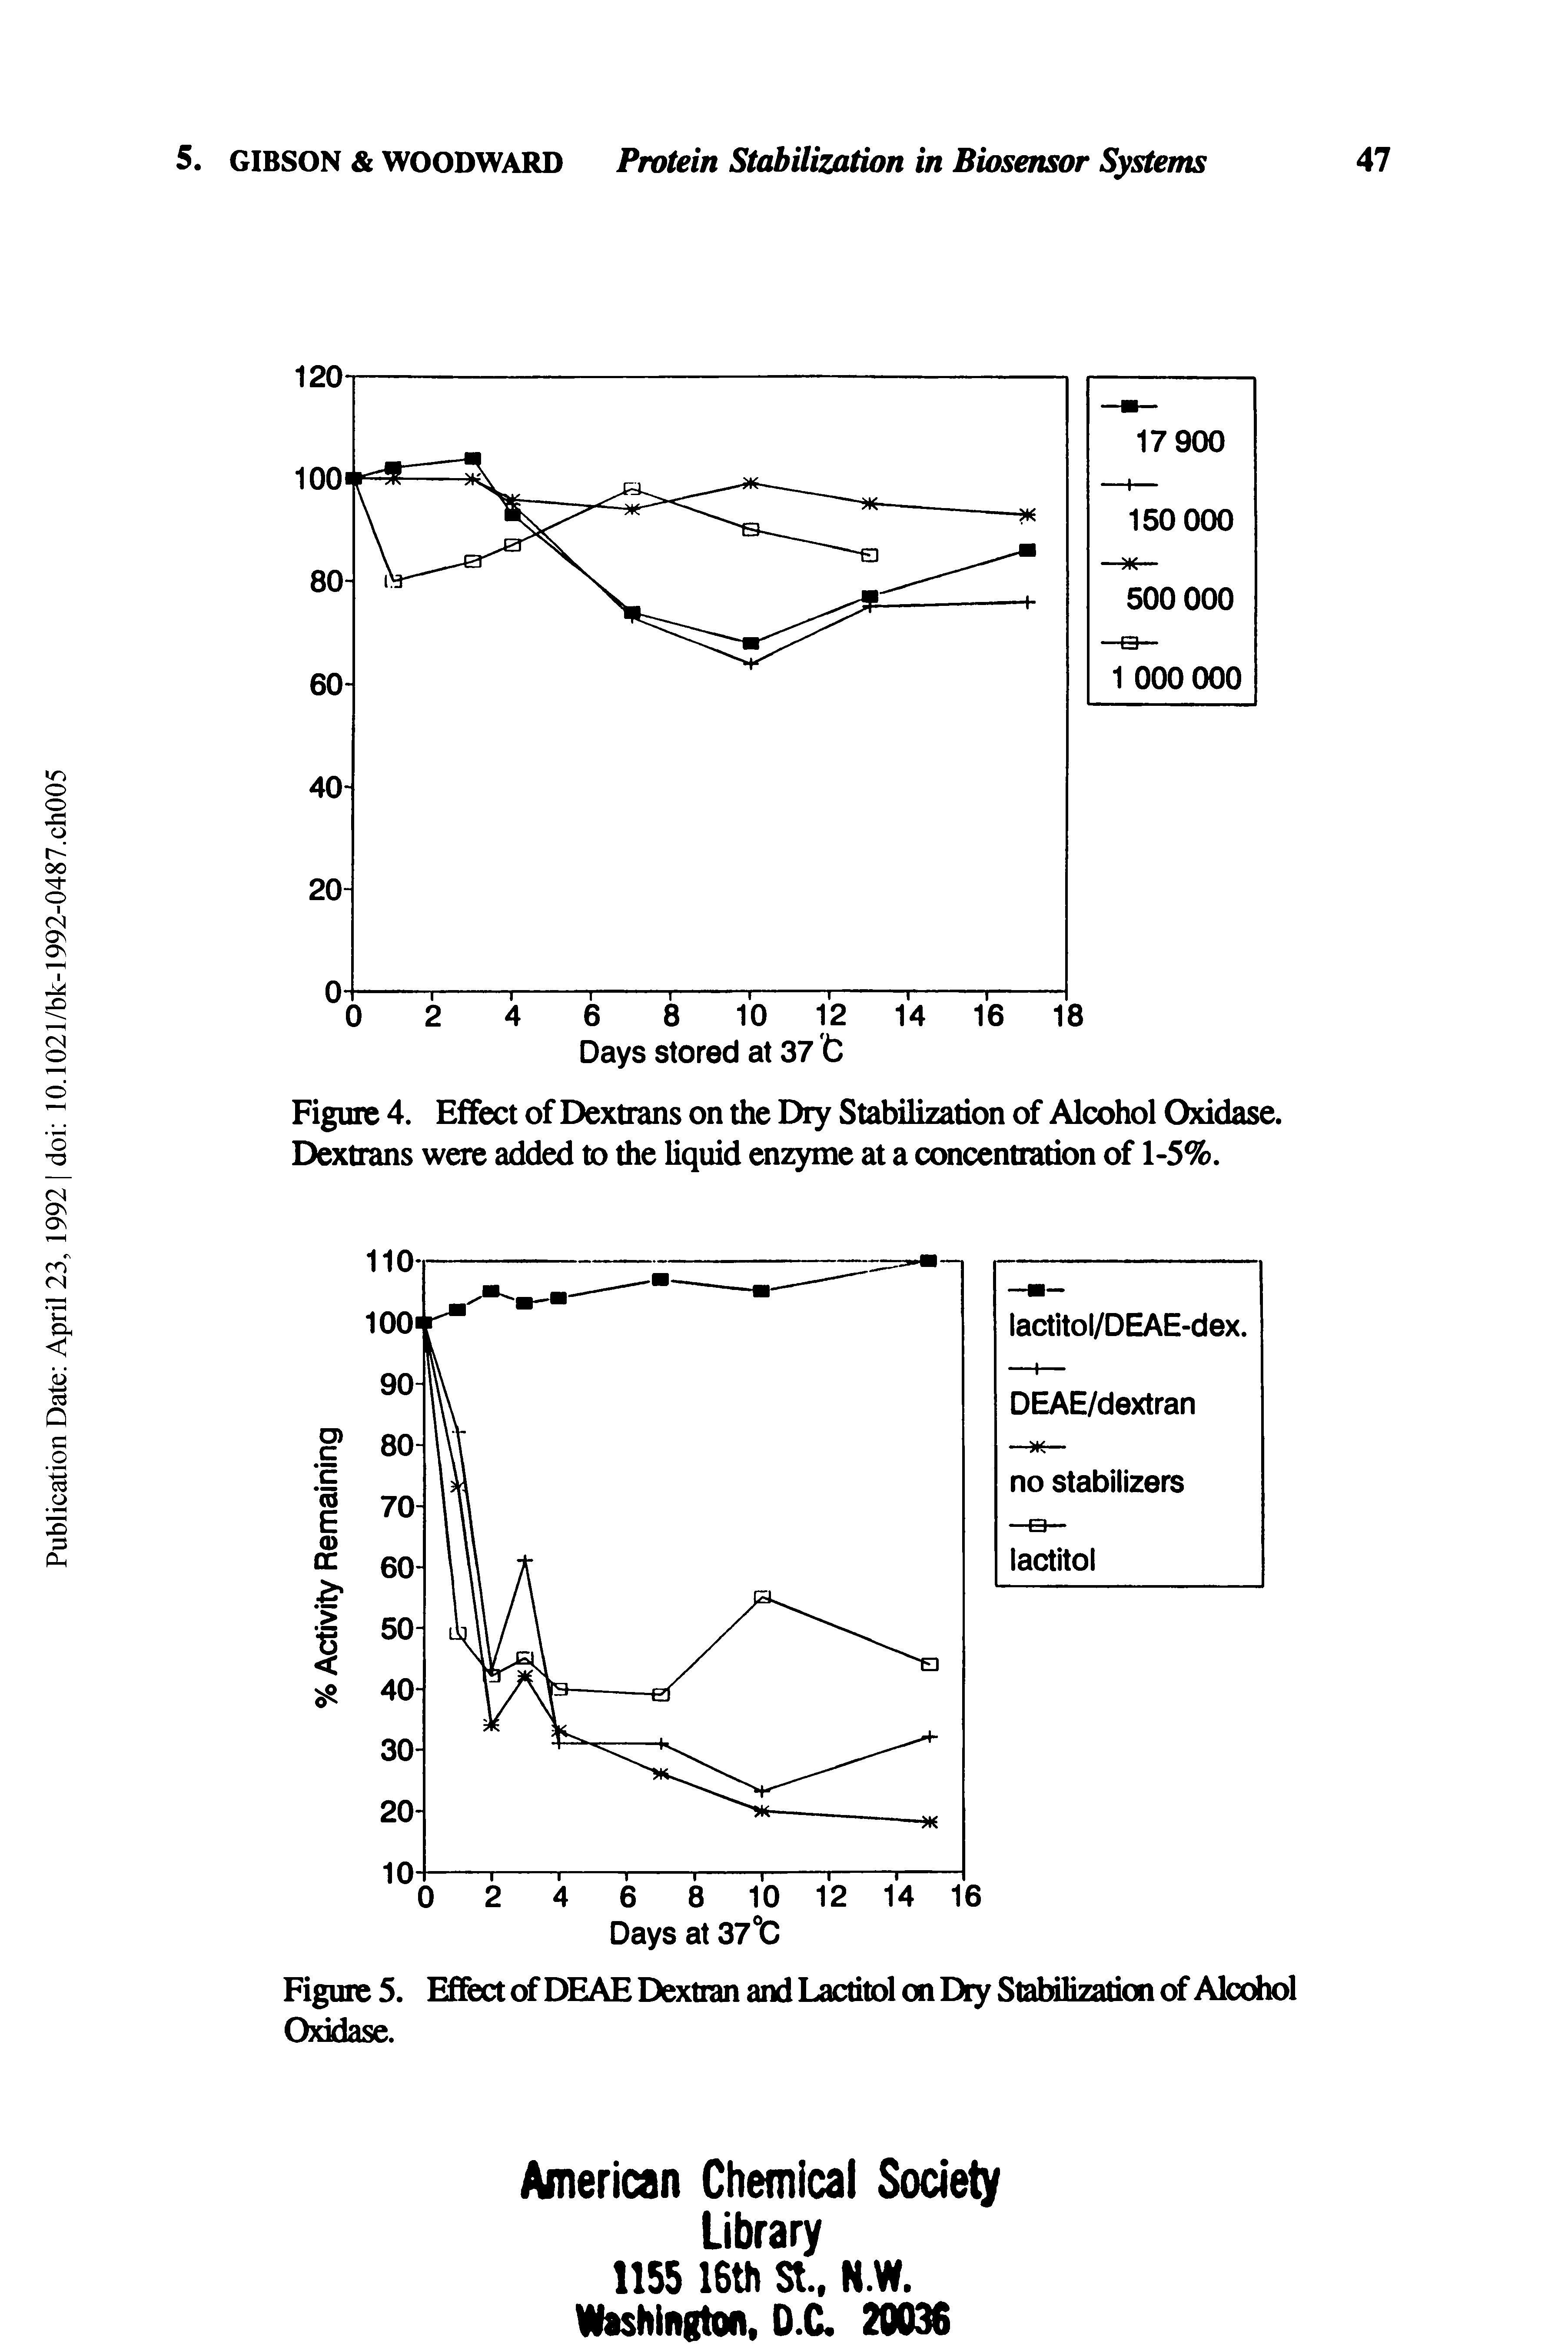 Figure 4. Effect of Dextrans on the Dry Stabilization of Alcohol Oxidase. Dextrans were added to the liquid enzyme at a concentration of 1-5%.